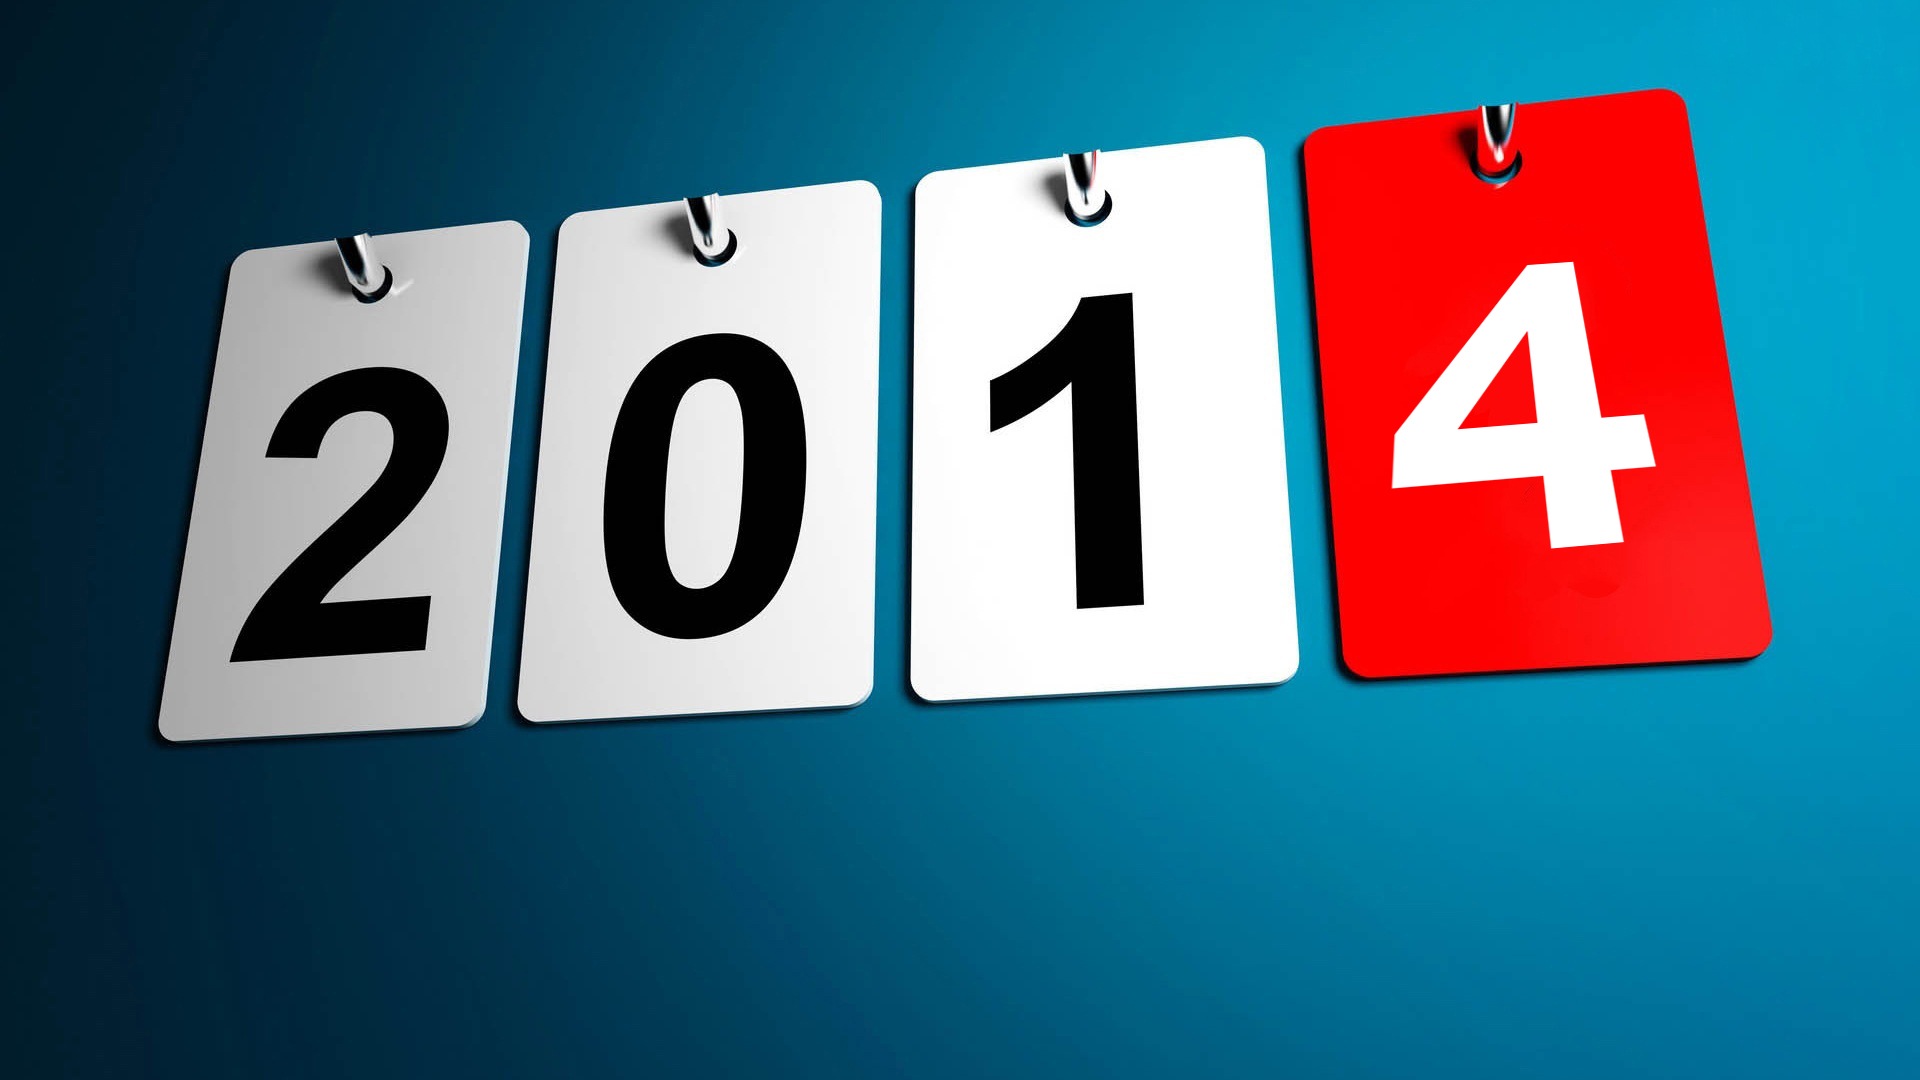 2014 New Year Theme HD Wallpapers (1) #18 - 1920x1080